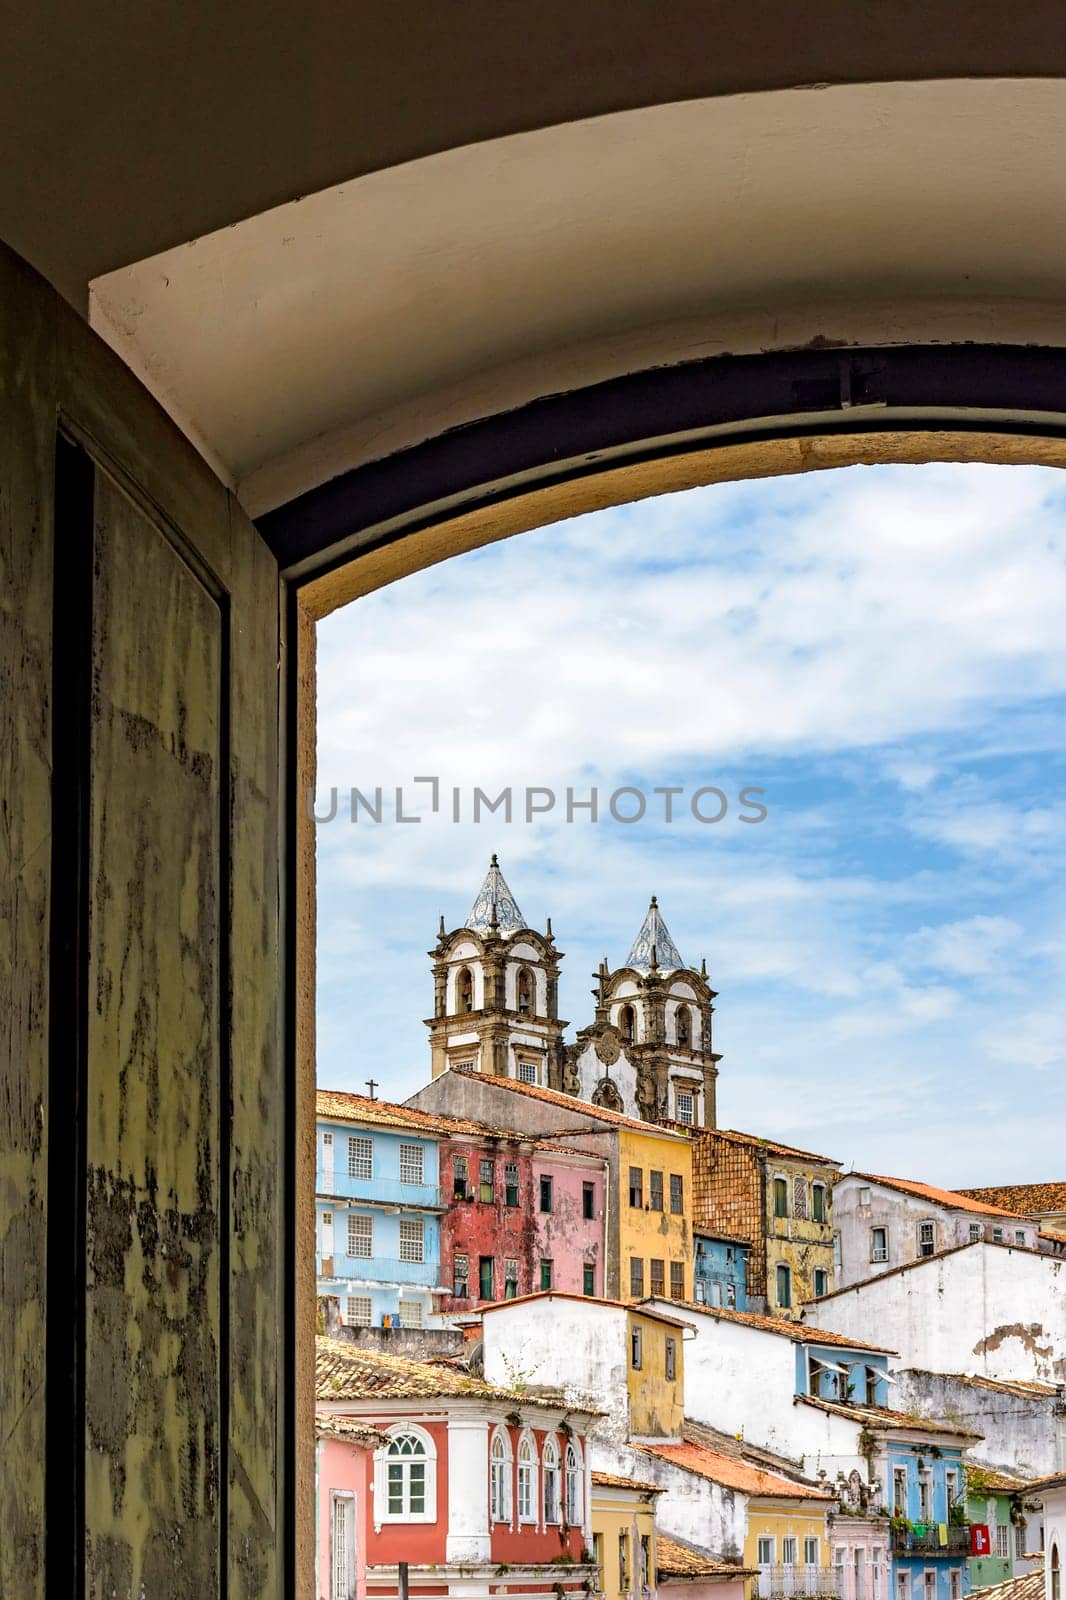 View of the famous Pelourinho neighborhood in the city of Salvador through an old colonial style wooden window